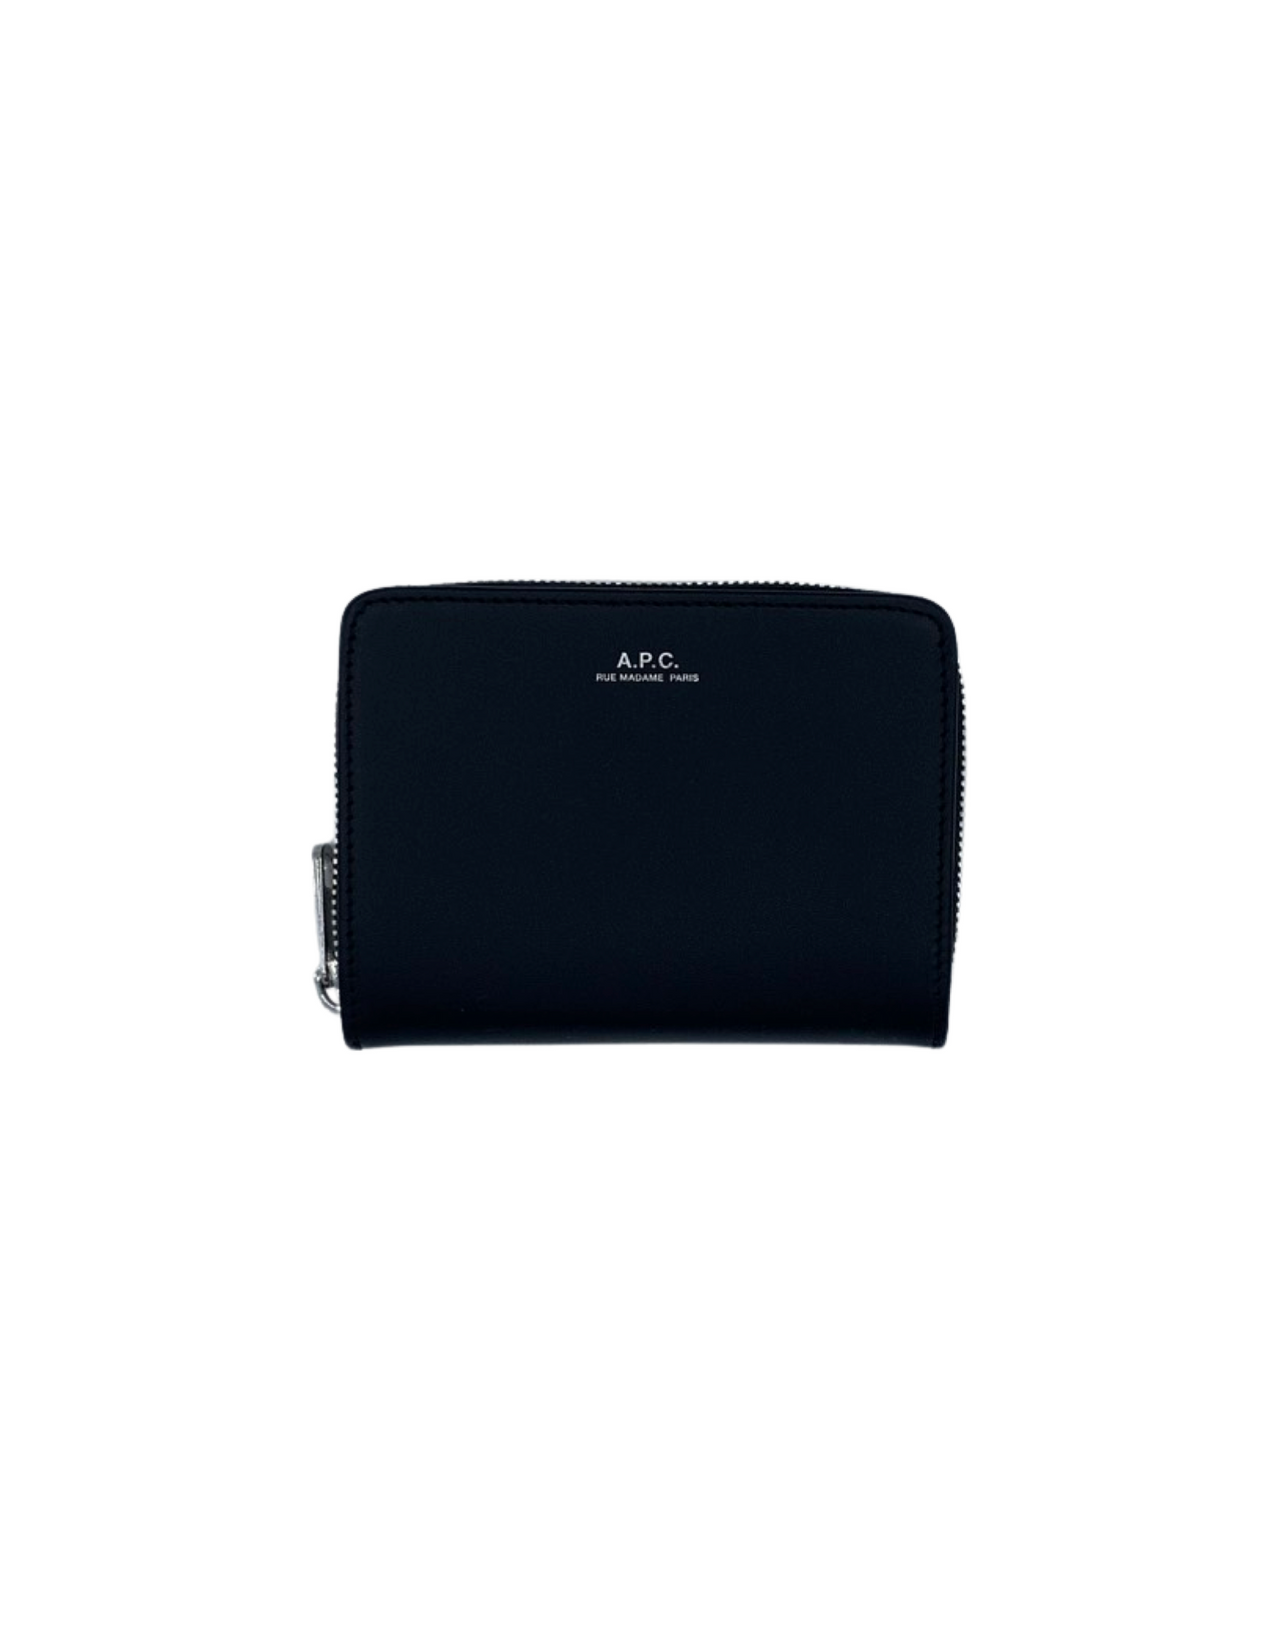 A.P.C. Wallet leather